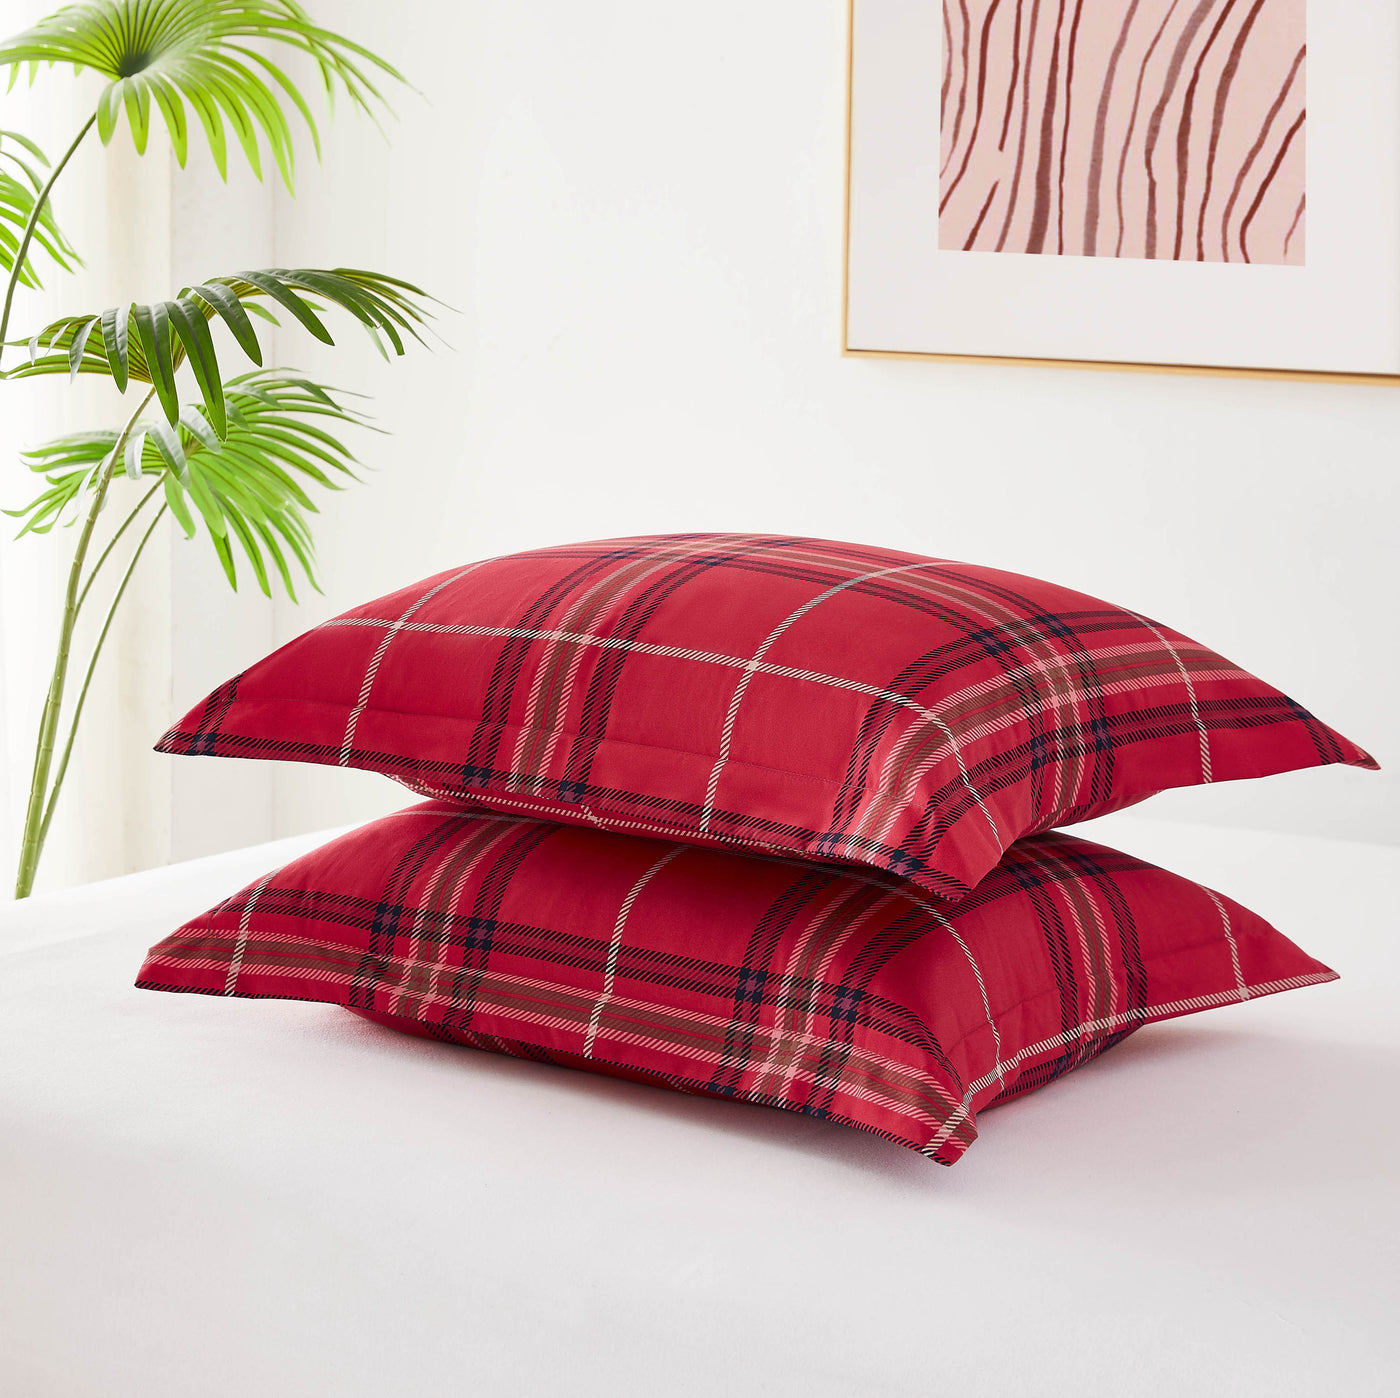 Detailed Shams Image of Purely Plaid Duvet Cover Set in Red#color_plaid-red.